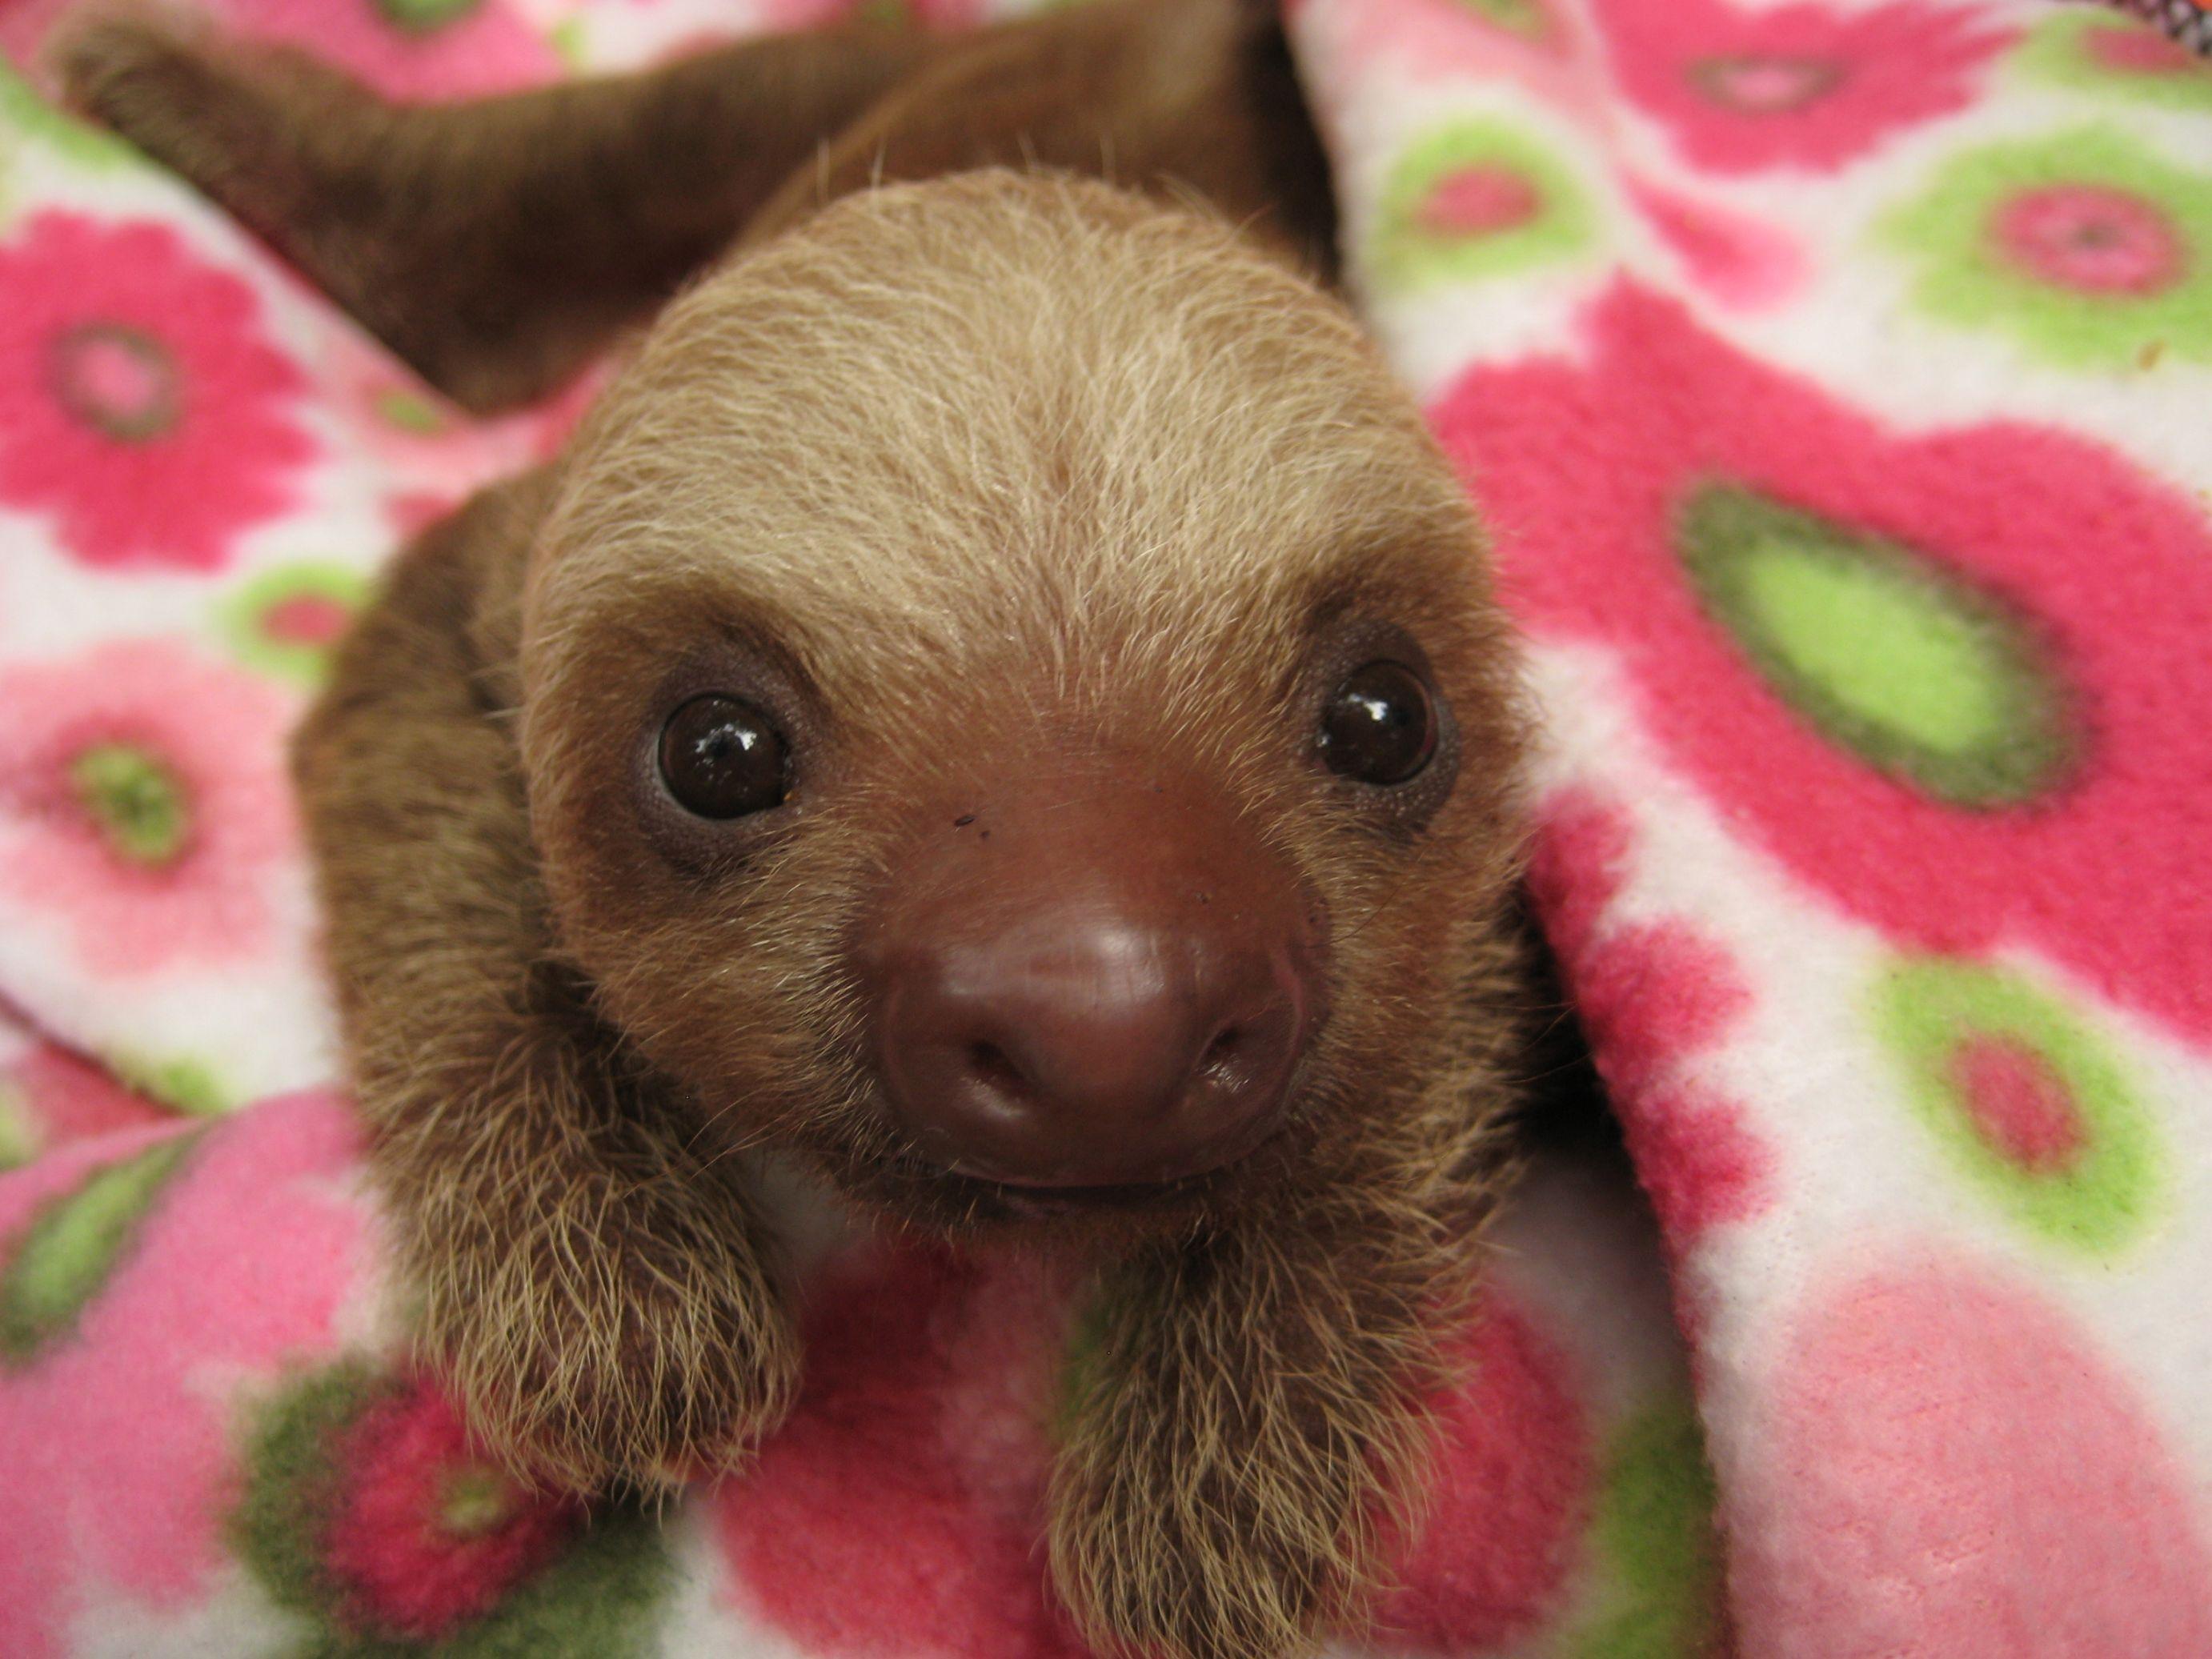 Baby Sloth Wallpapers ✓ The Galleries of HD Wallpapers